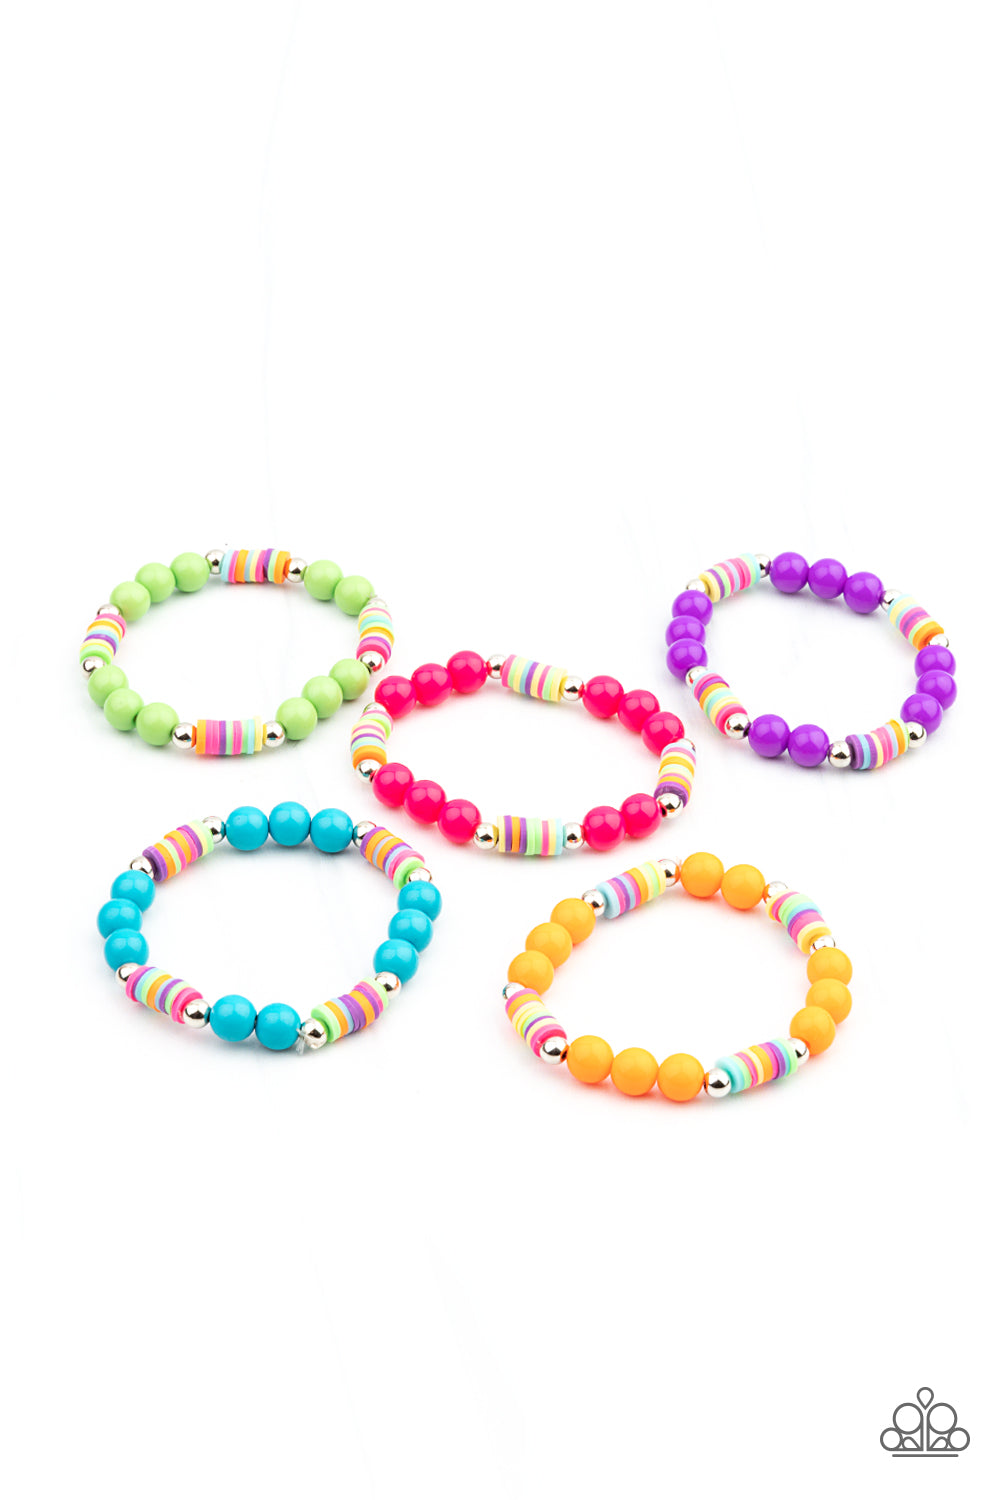 Starlet Shimmer Multi Colored Rubbery accents with beads - Bracelet Kit - The V Resale Boutique